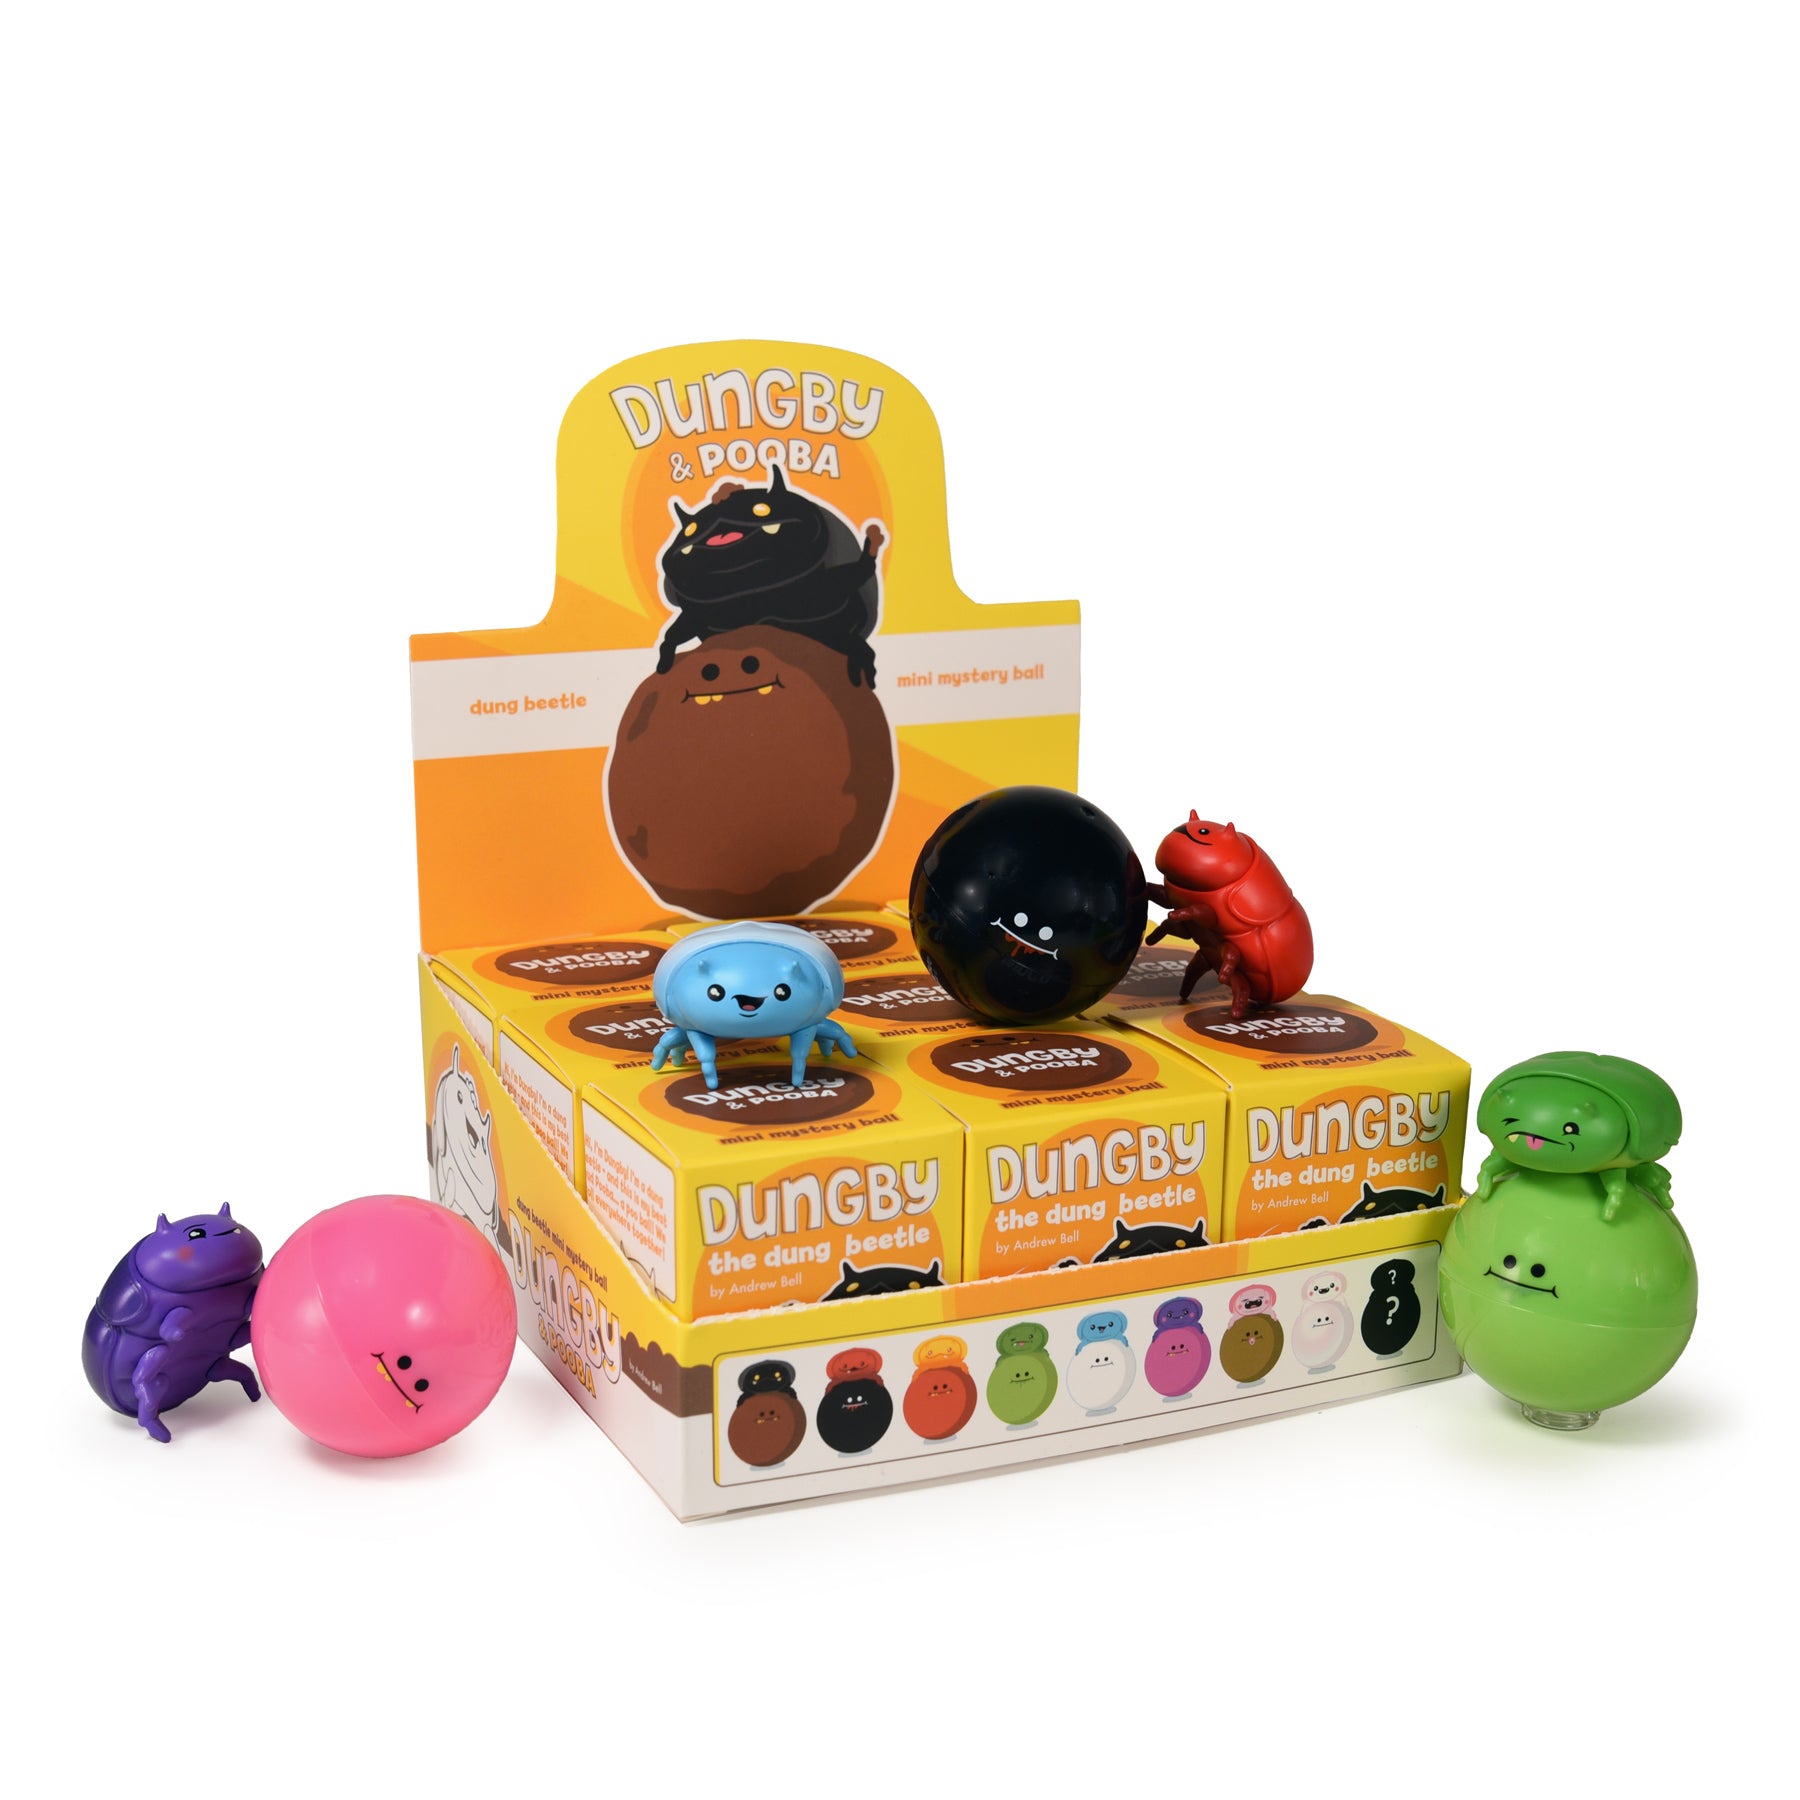 Dungby & Pooba mini ball Blind Box Series by Andrew Bell: Group of baby toys including Dungby, Pooba, and more.